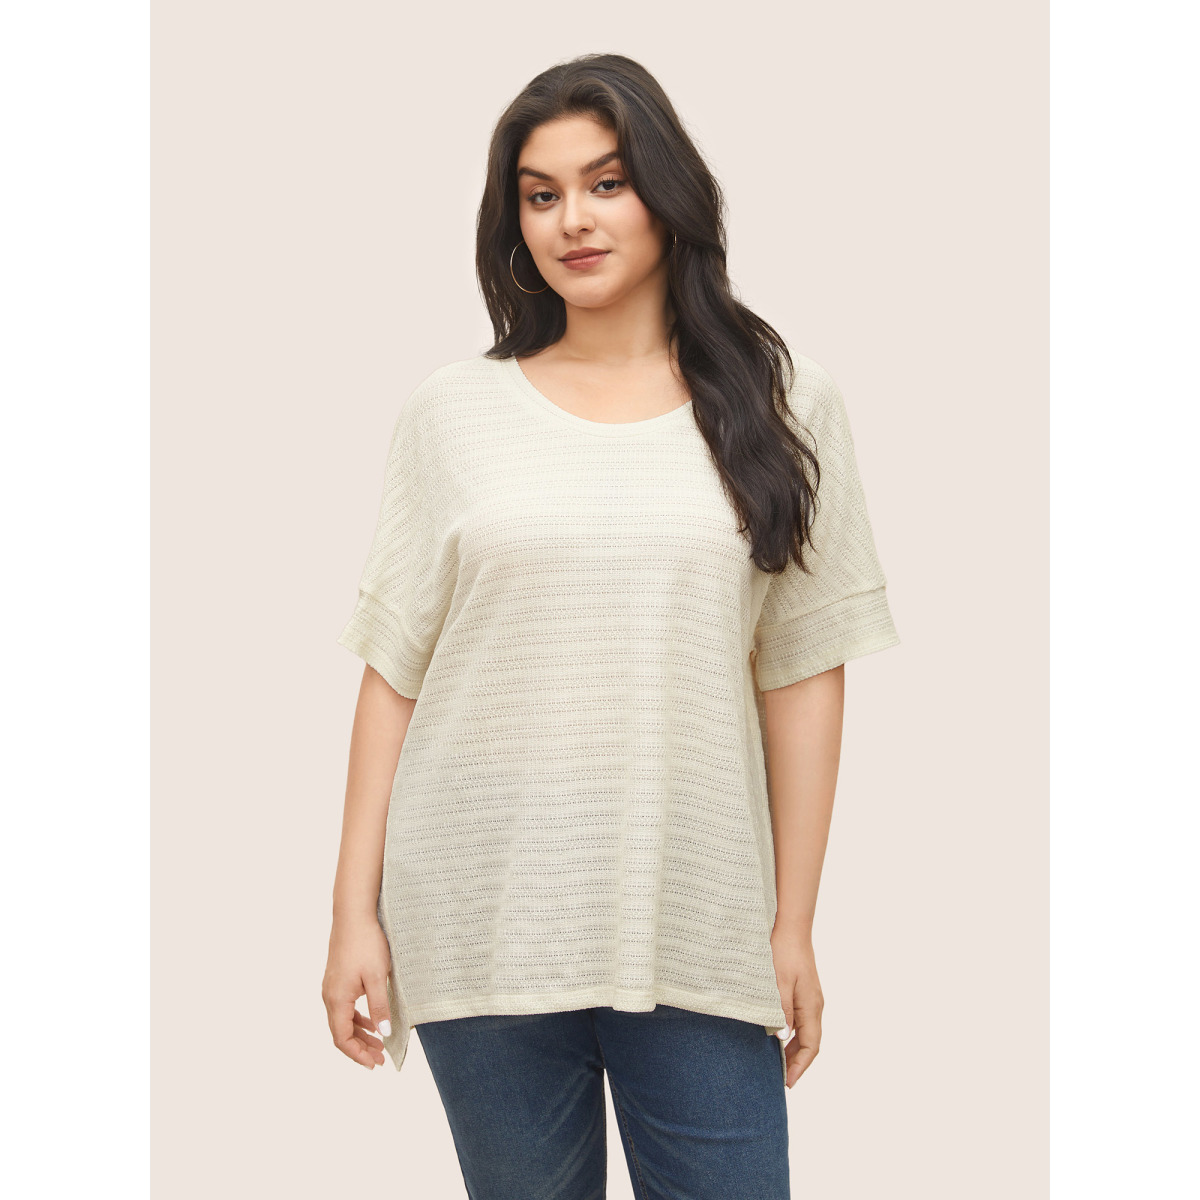 

Plus Size Solid Textured Crew Neck Batwing Sleeve T-shirt Beige Women Casual Texture Plain Round Neck Everyday T-shirts BloomChic